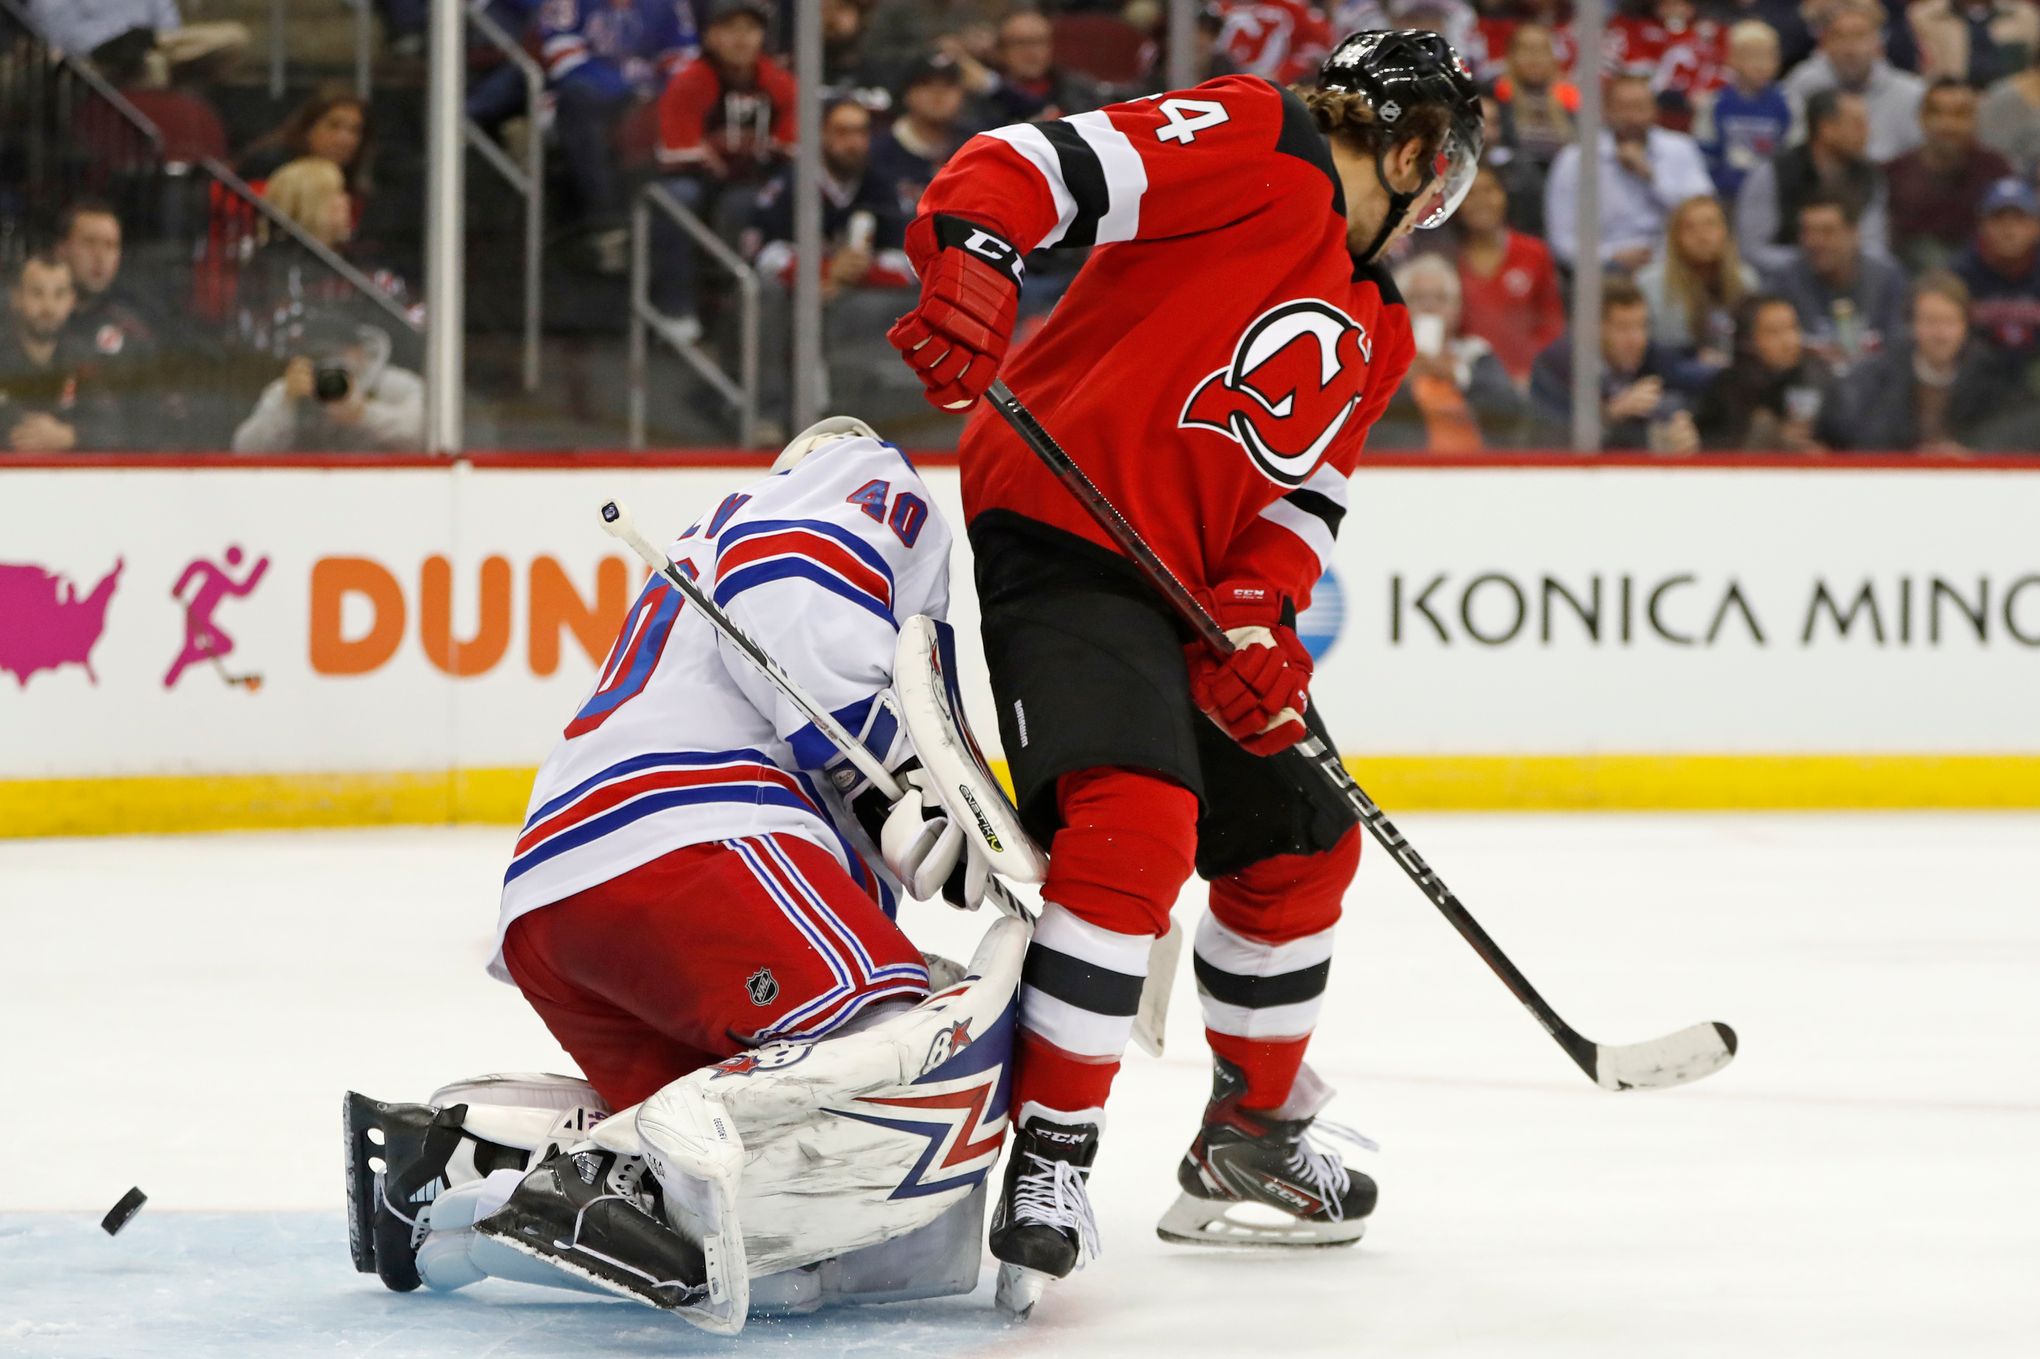 New Jersey Devils right wing Kyle Palmieri skates to the puck